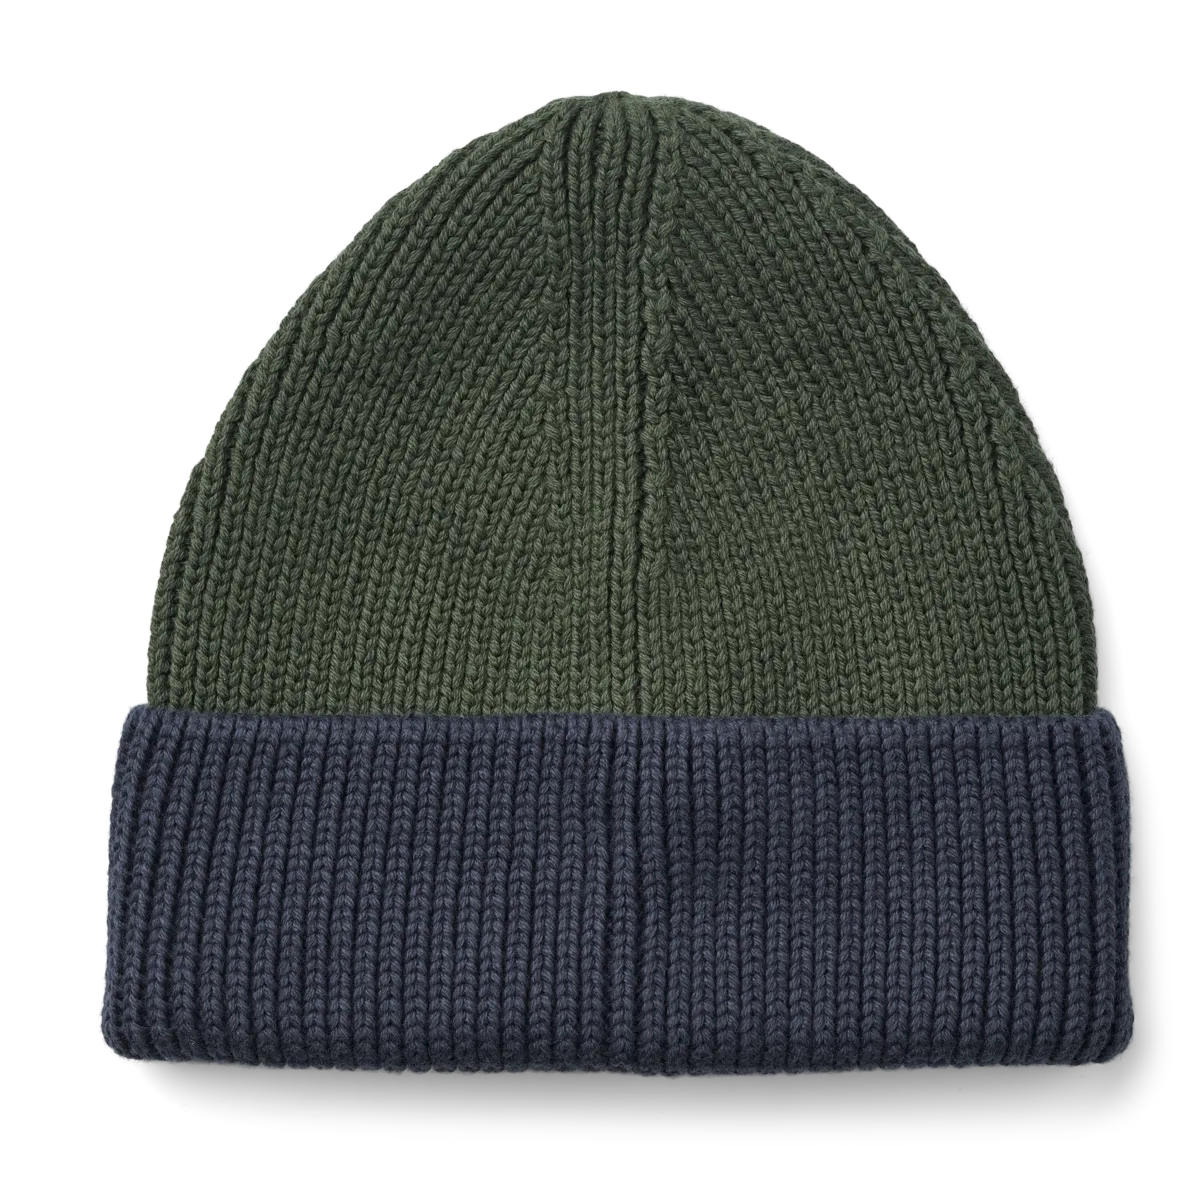 Ezra beanie (Available in 3 colors)